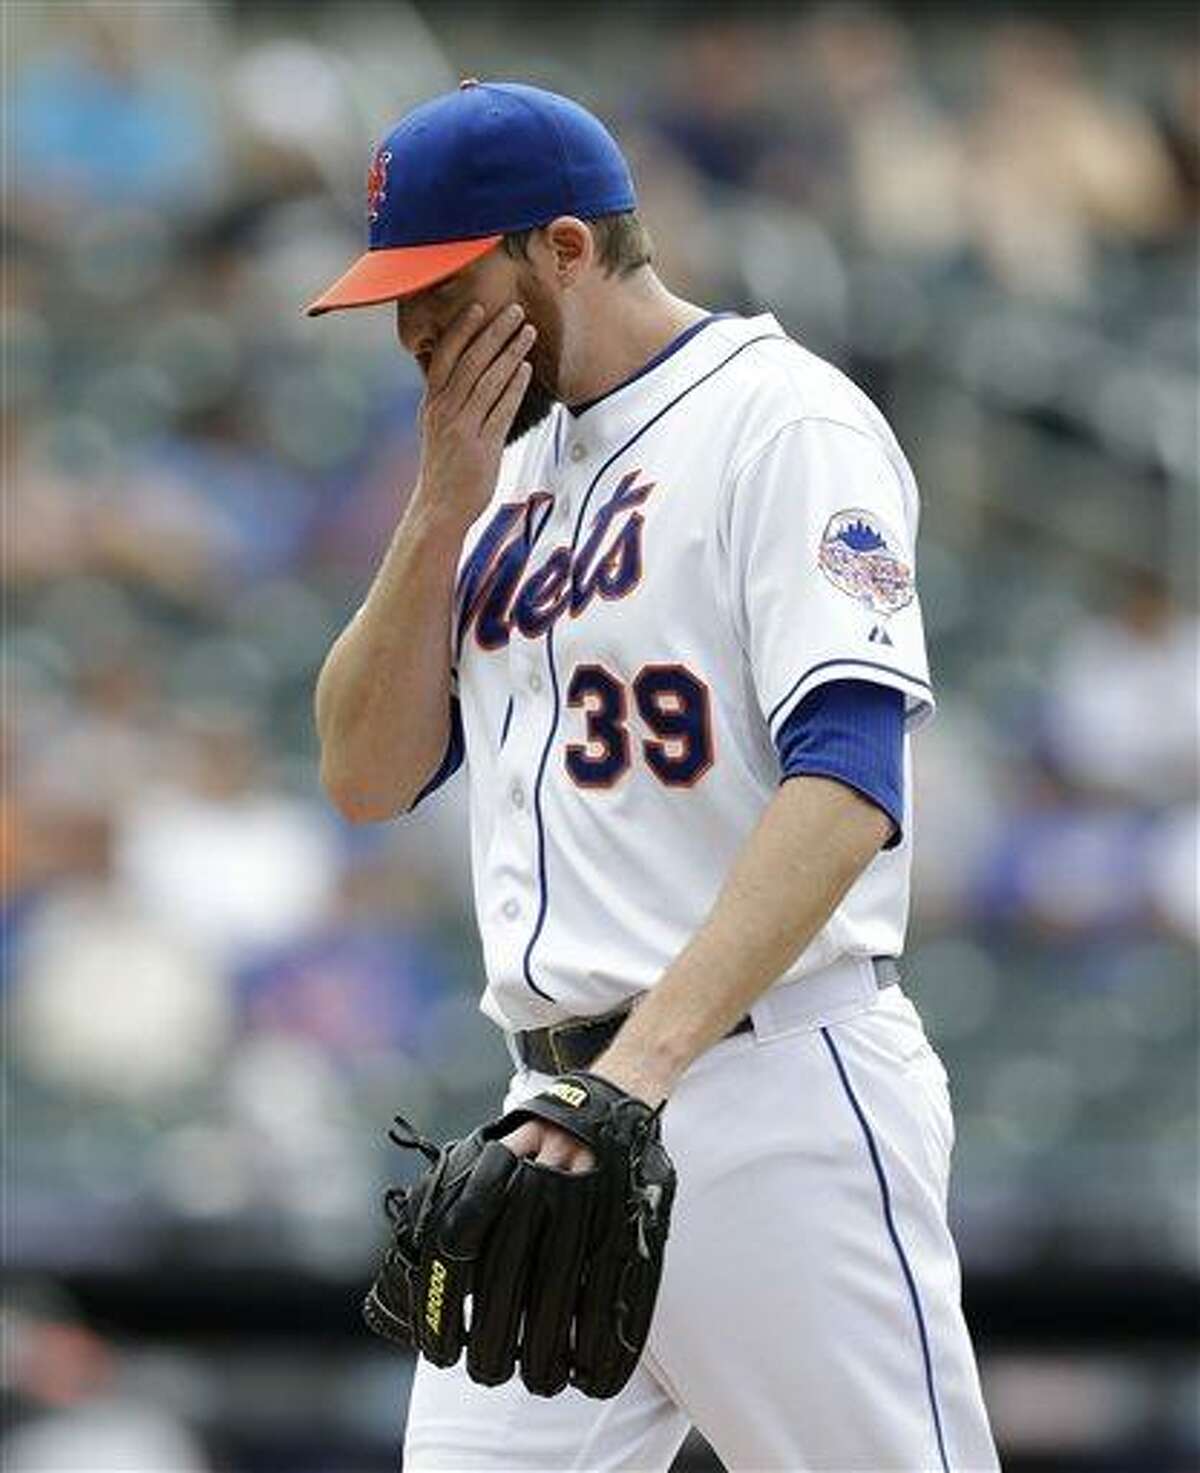 New York Mets relief pitcher Bobby Parnell (39) reacts leaving the mound after Mets manager Terry Collins removed Parnell from the game in the tenth-inning of the Mets 8-4 loss to the Miami Marlins in a baseball game in New York, Sunday, June 9, 2013. Parnell allowed two hits to the Marlins and Adeiny Hechavarria reached on Daniel Murphy's fielding error allowing Logan Morrison to score the go-ahead run. (AP Photo/Kathy Willens)